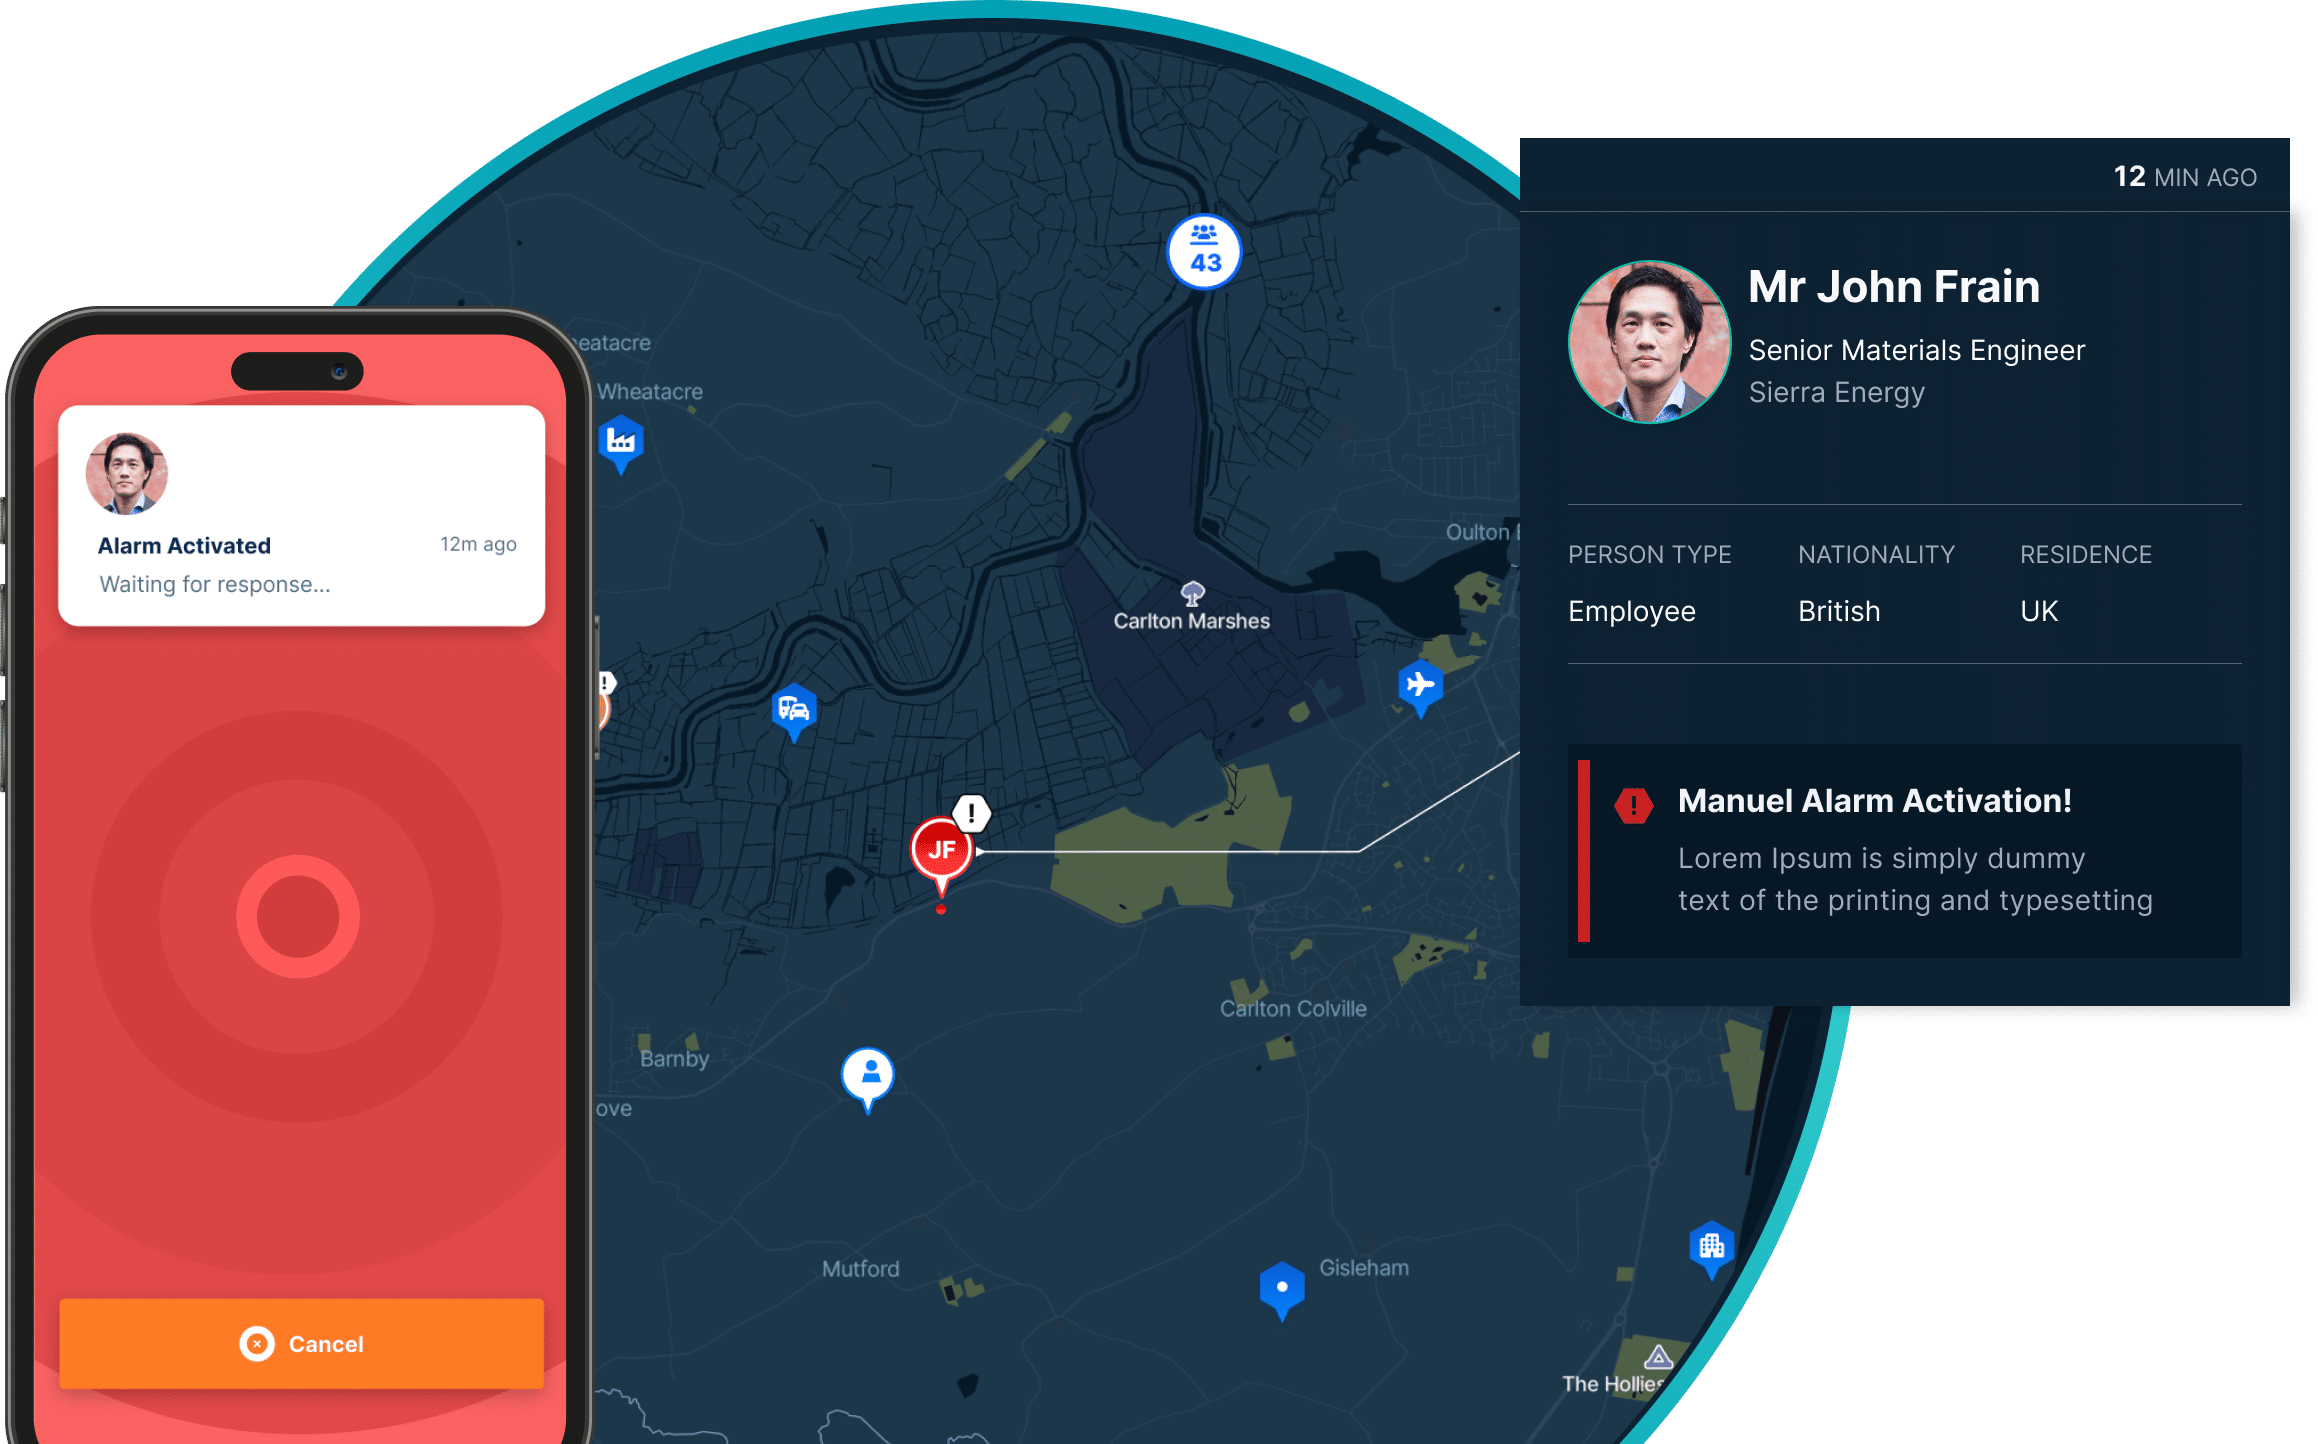 The Restrata lone worker app showing real-time emergency response